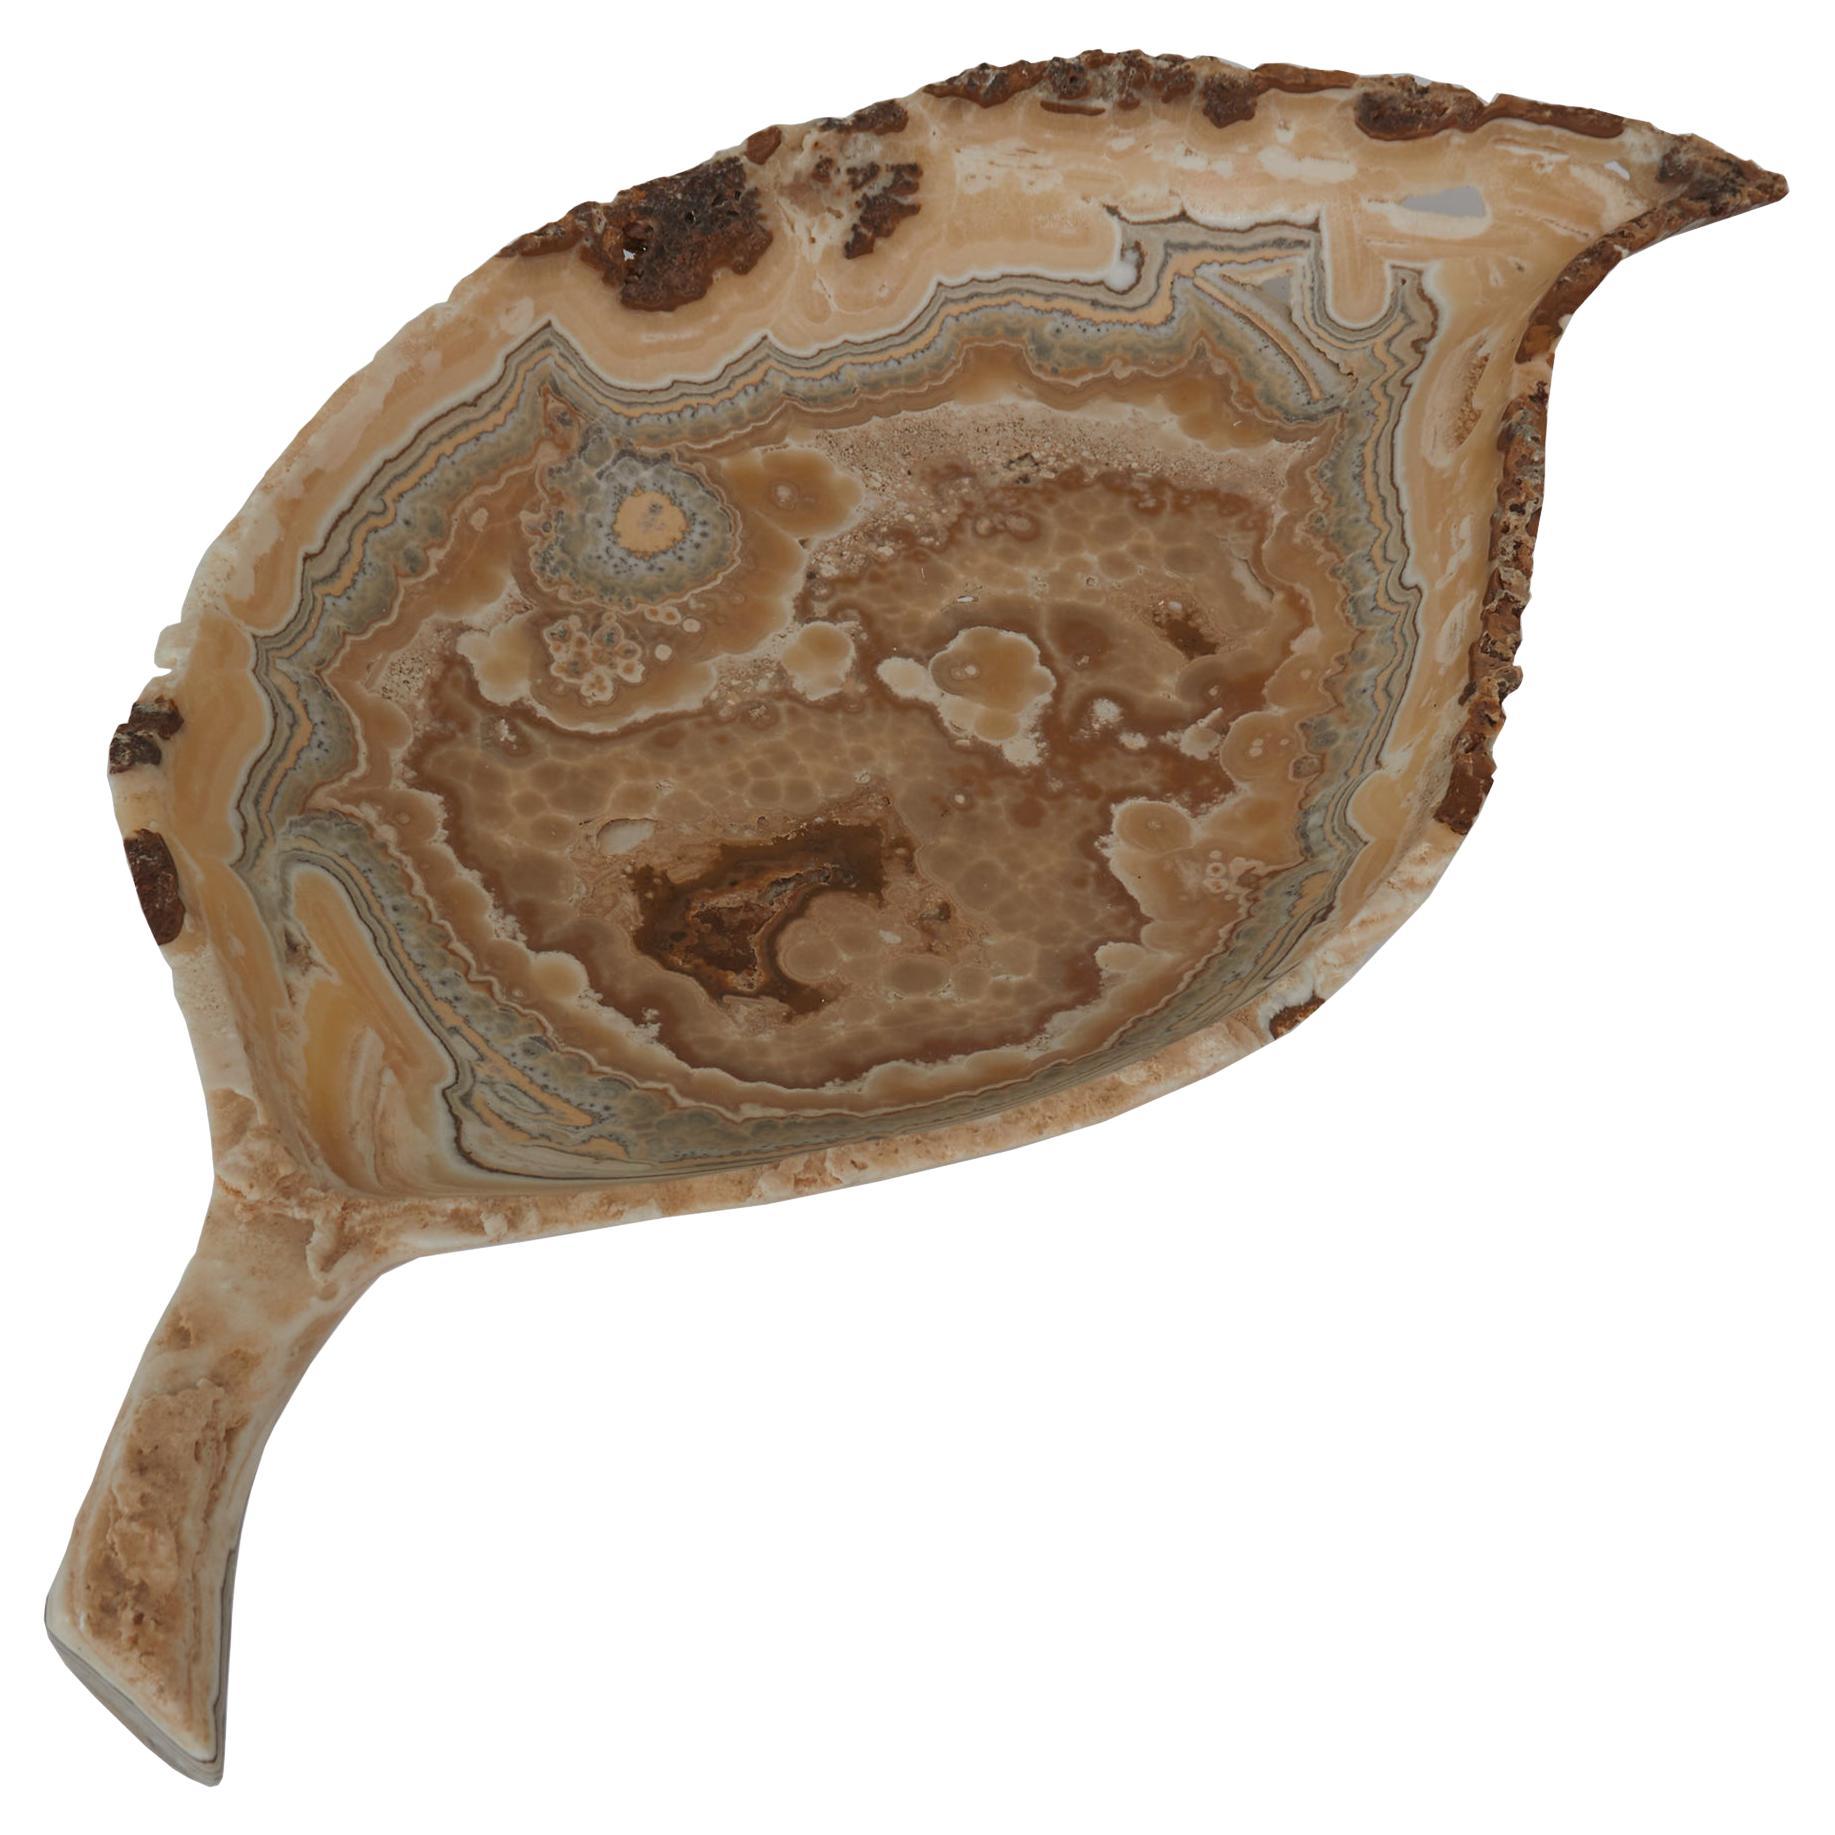 Swirling bands of caramel, gray and tobacco mineralization deposits wrap around the sides of this translucent, undulating aragonite vessel in a leaf form. 
      